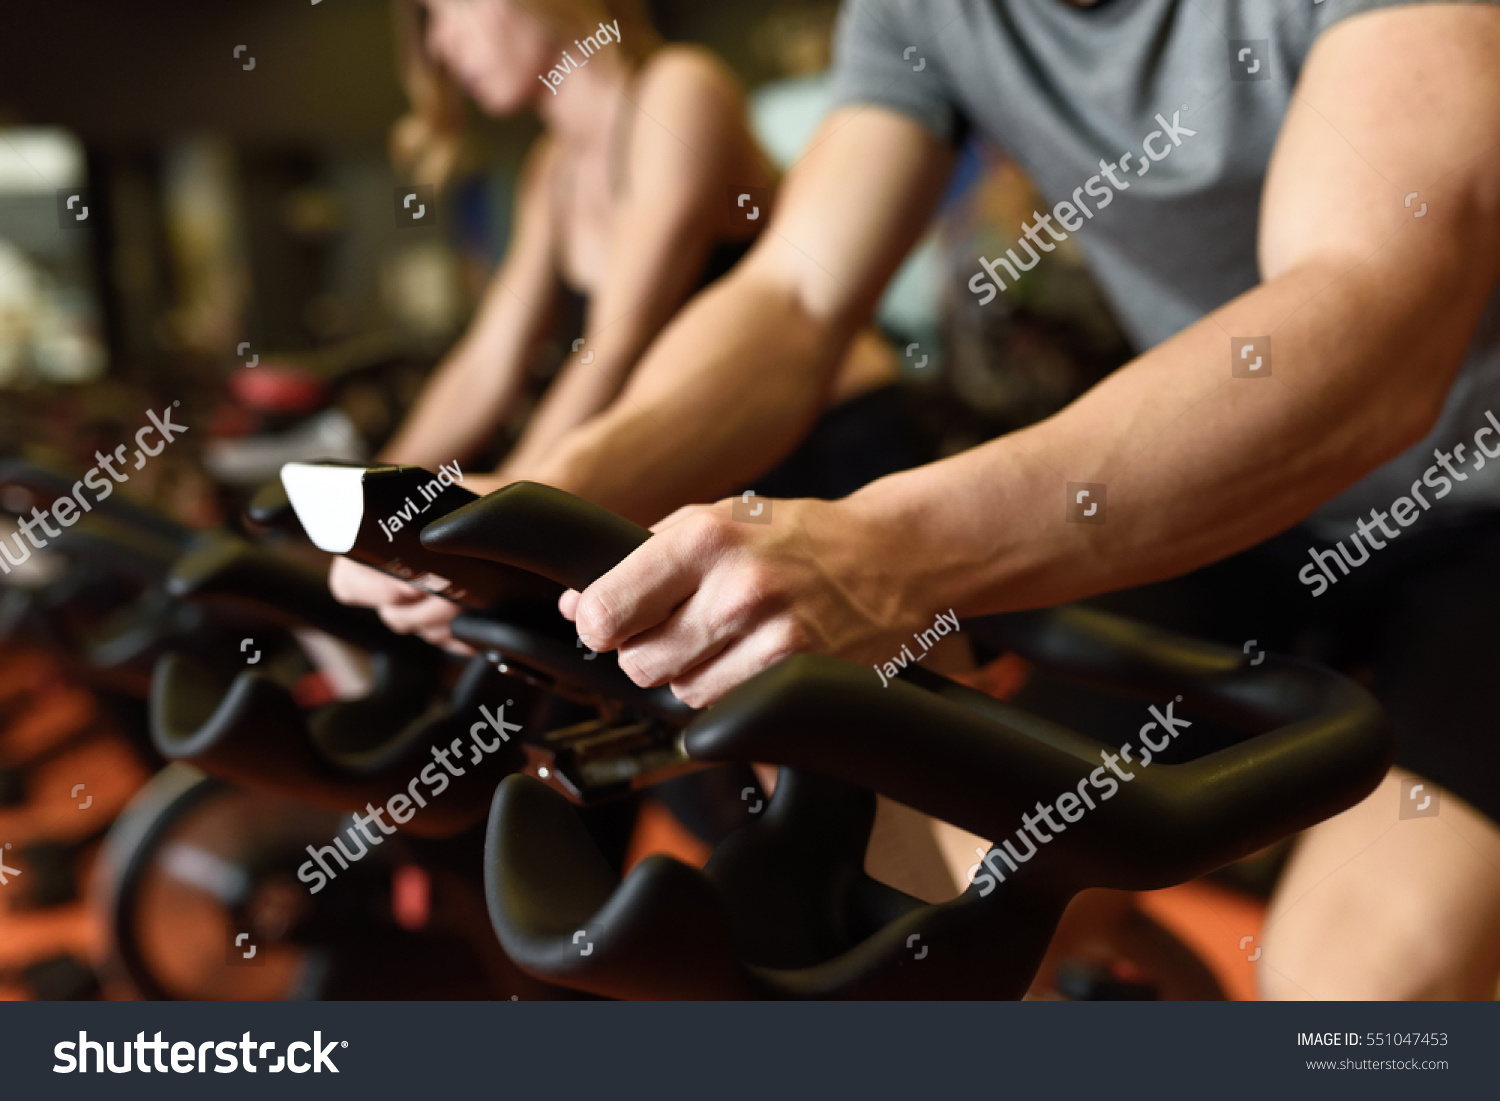 Close-up of hands of a man biking in the gym, exercising legs doing cardio workout cycling bikes. Couple in a spinning class wearing sportswear. #551047453